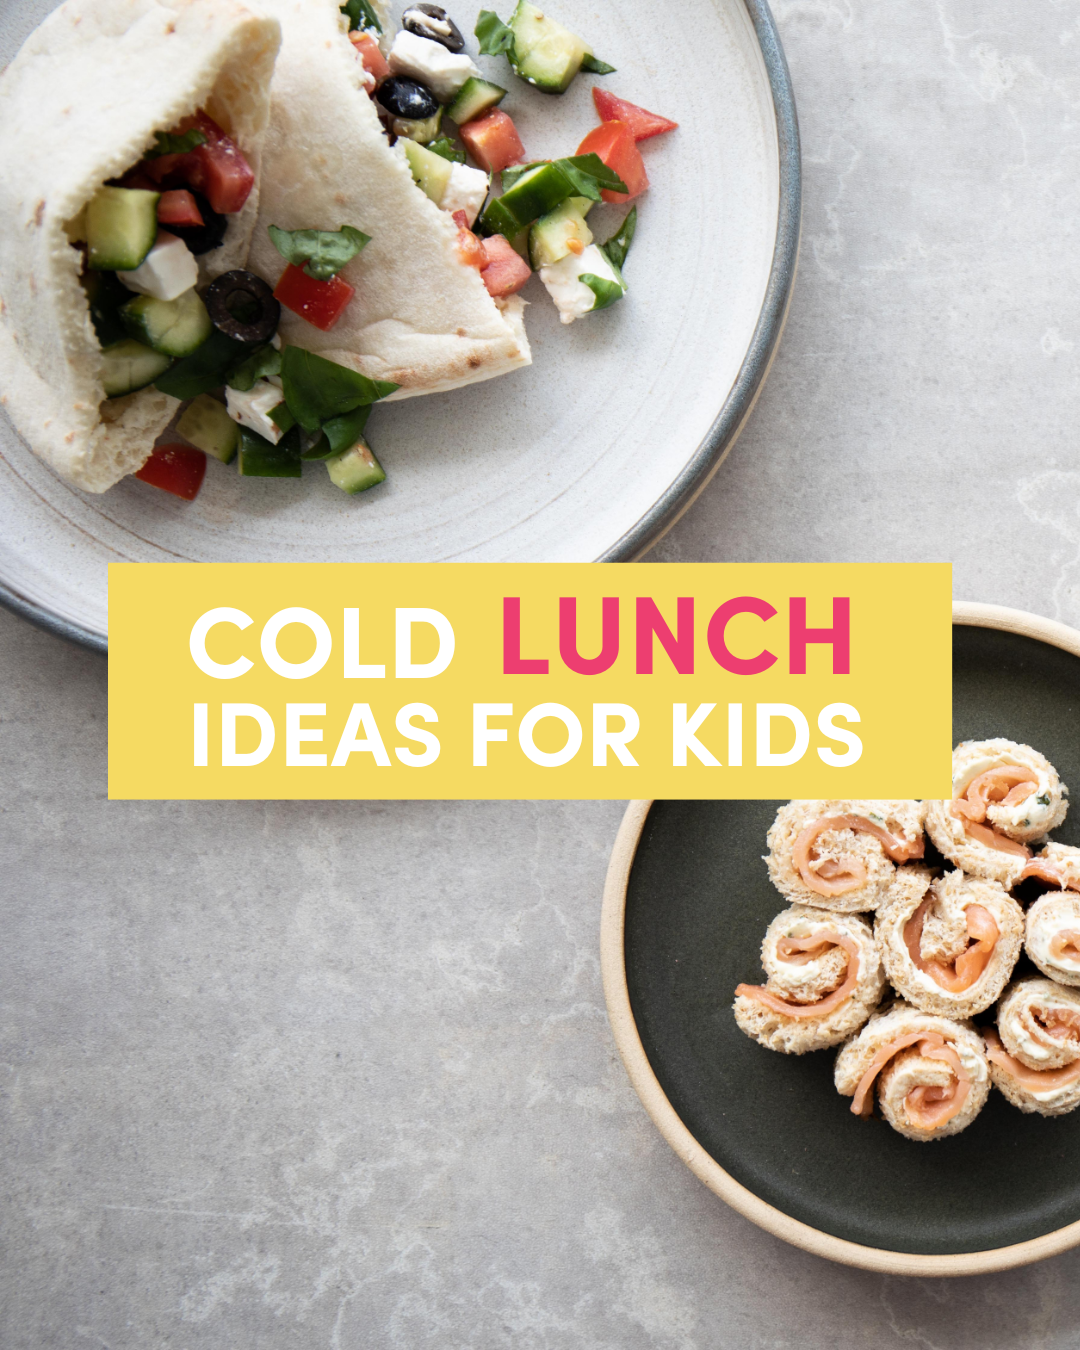 Cold Lunch Ideas for Kids